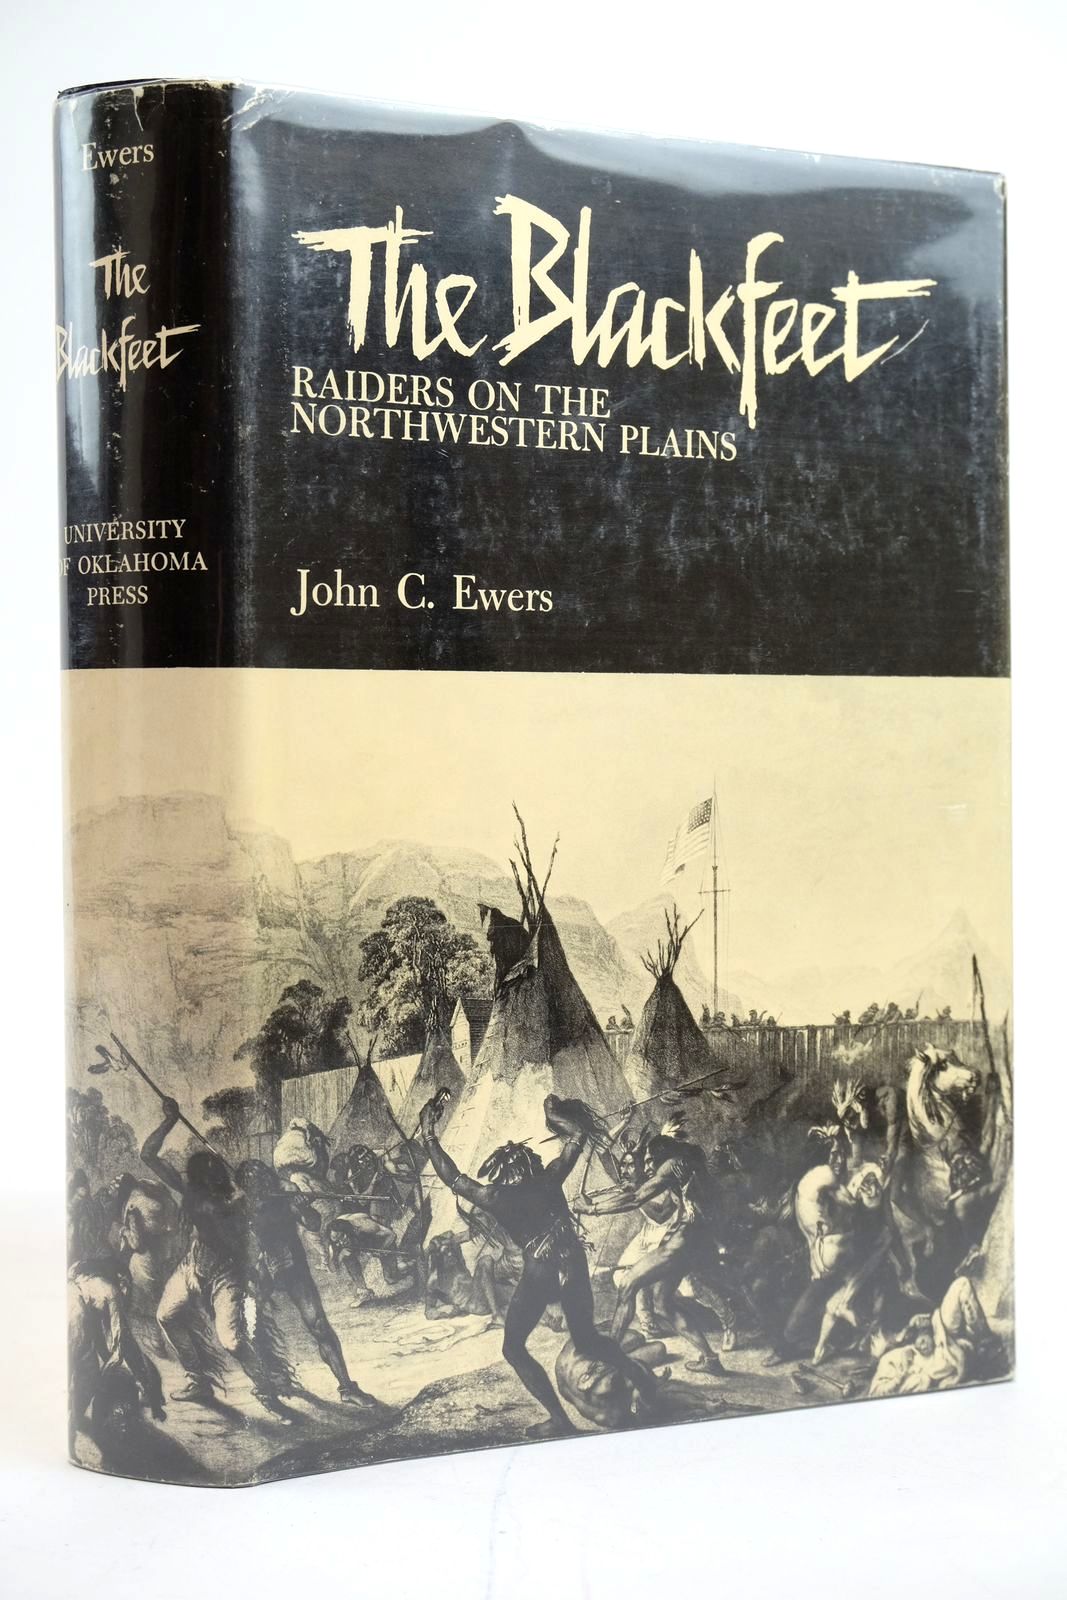 Photo of THE BLACKFEET: RAIDERS ON THE NORTHWESTERN PLAINS written by Ewers, John C. published by University of Oklahoma Press (STOCK CODE: 2135253)  for sale by Stella & Rose's Books